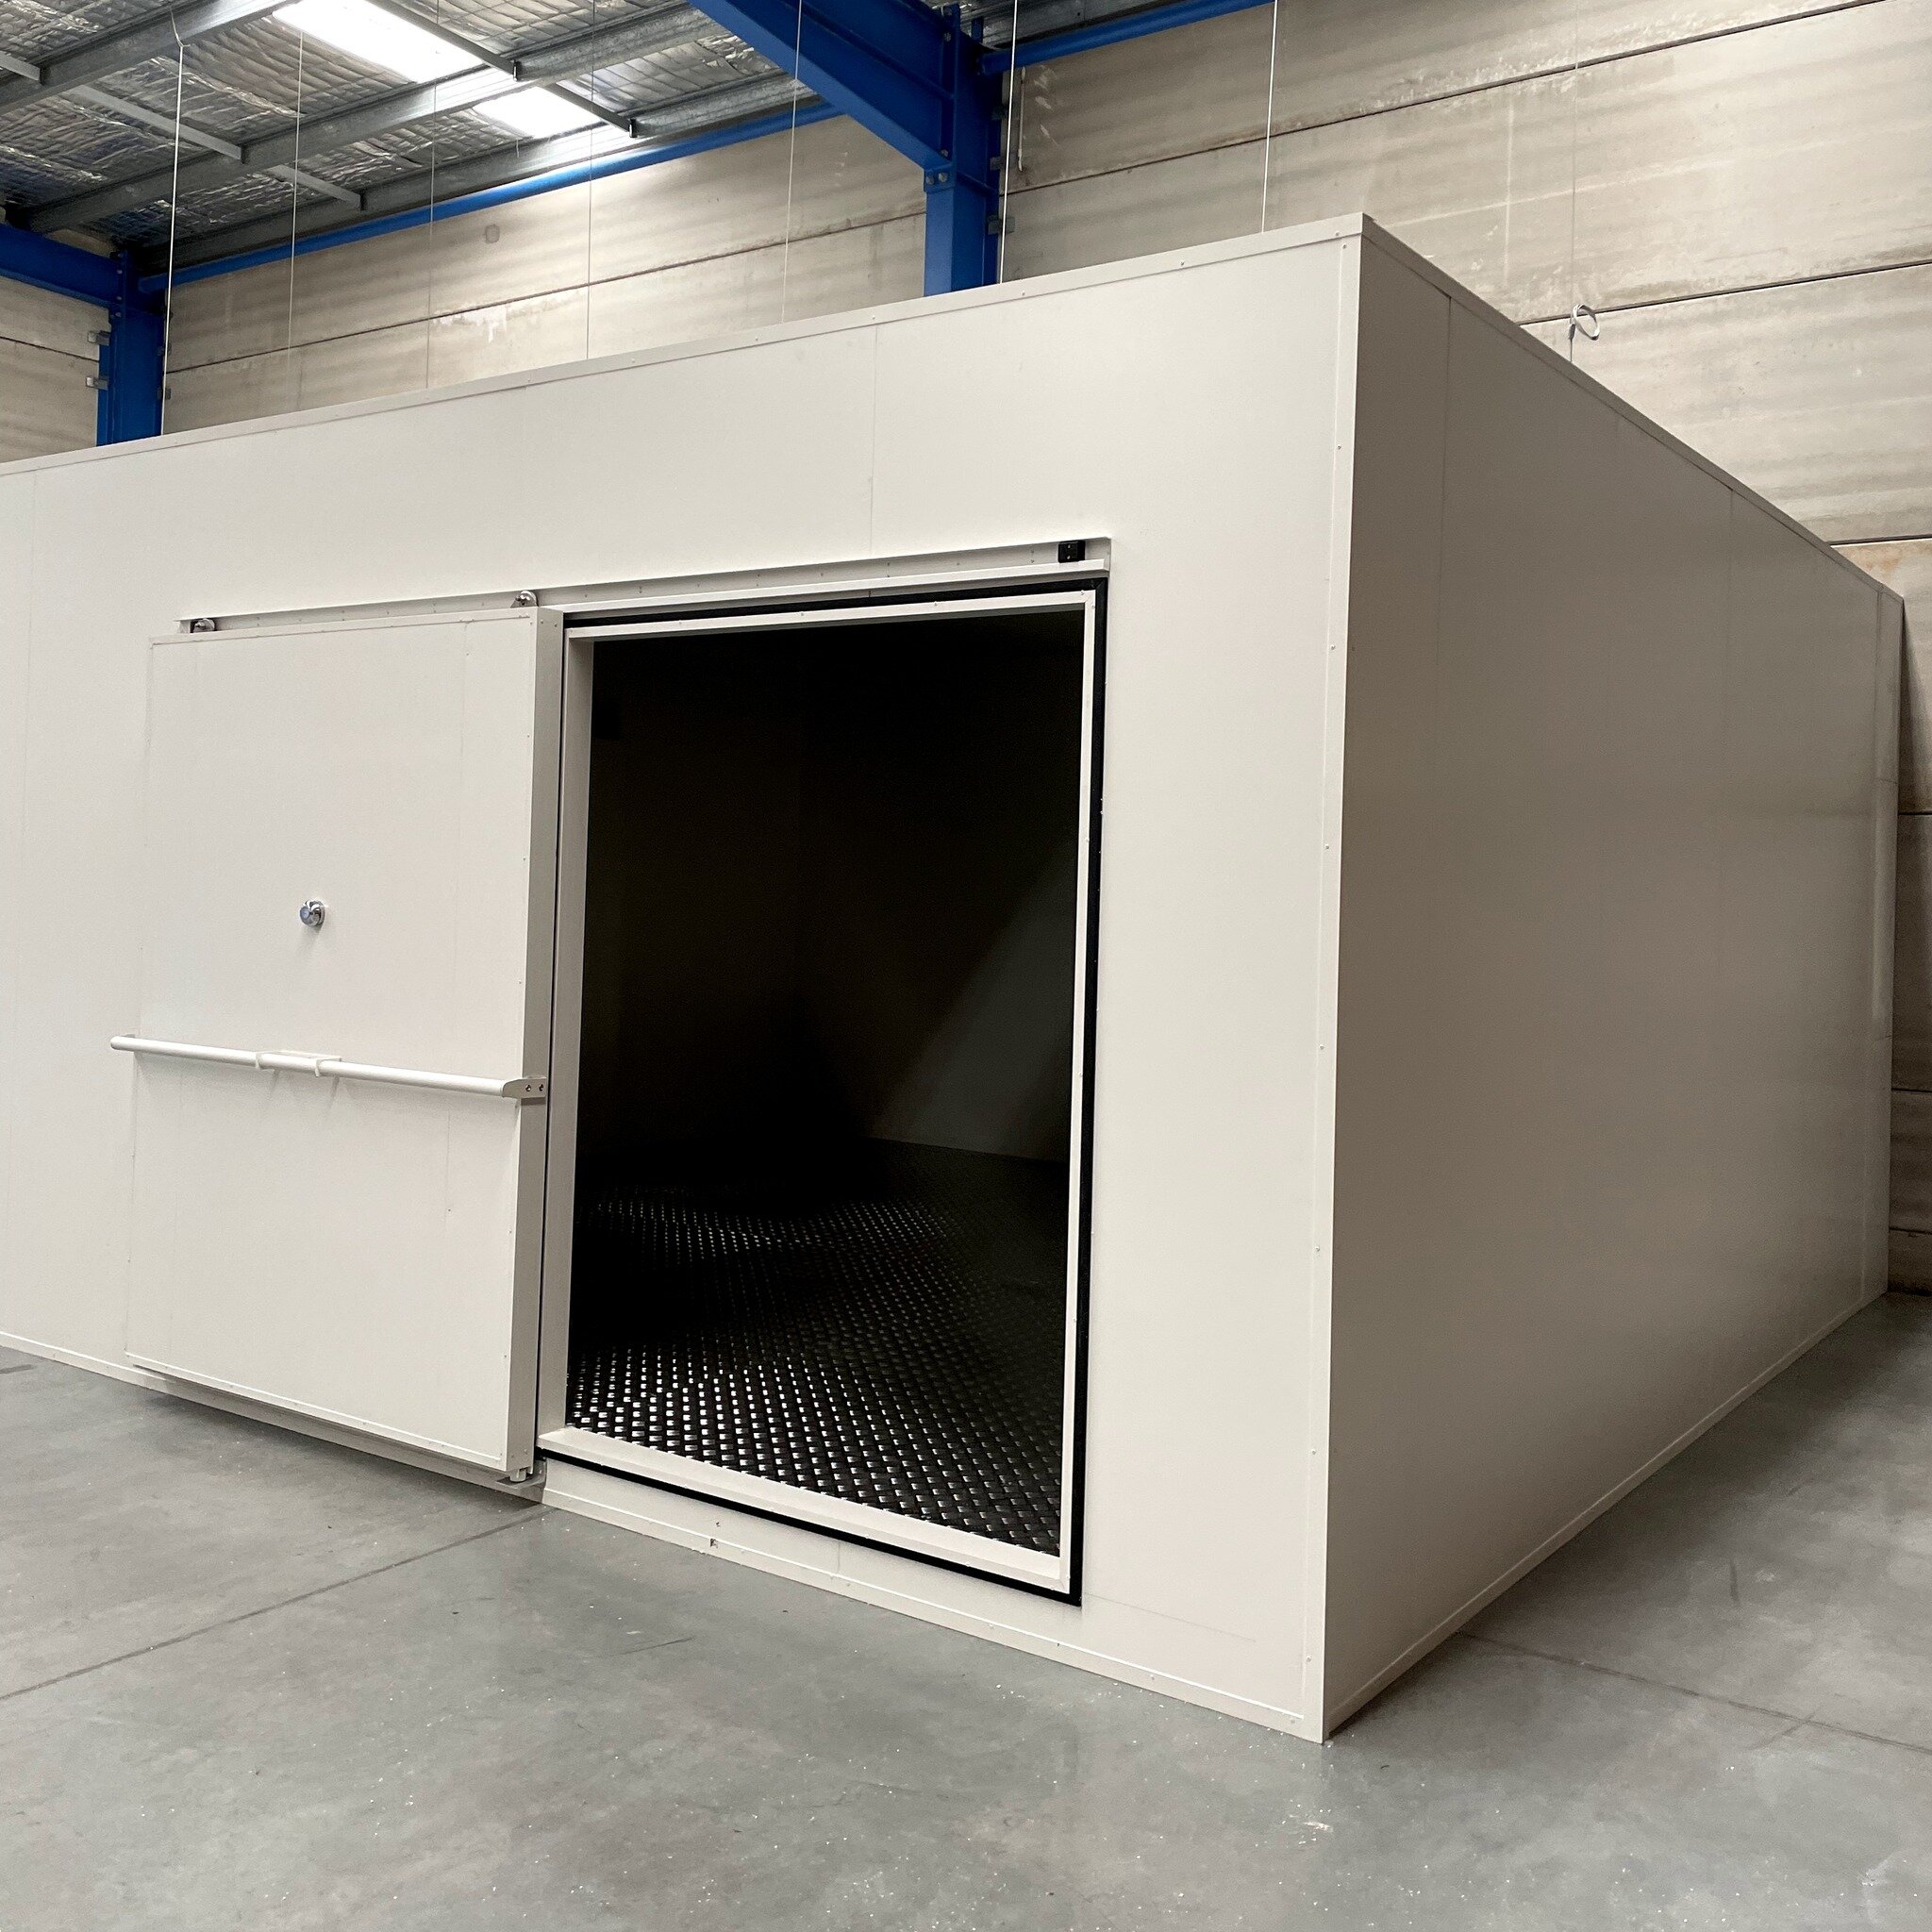 Build Your ColdRoom or Freezer for $13000

supply &amp; install coolroom size : 2400 x 2000 x 2400H with 75mm EPS panels for walls &amp; ceiling / floor included completed with all aluminium angles off white sealed &amp; one sliding door @ 800 x 1900